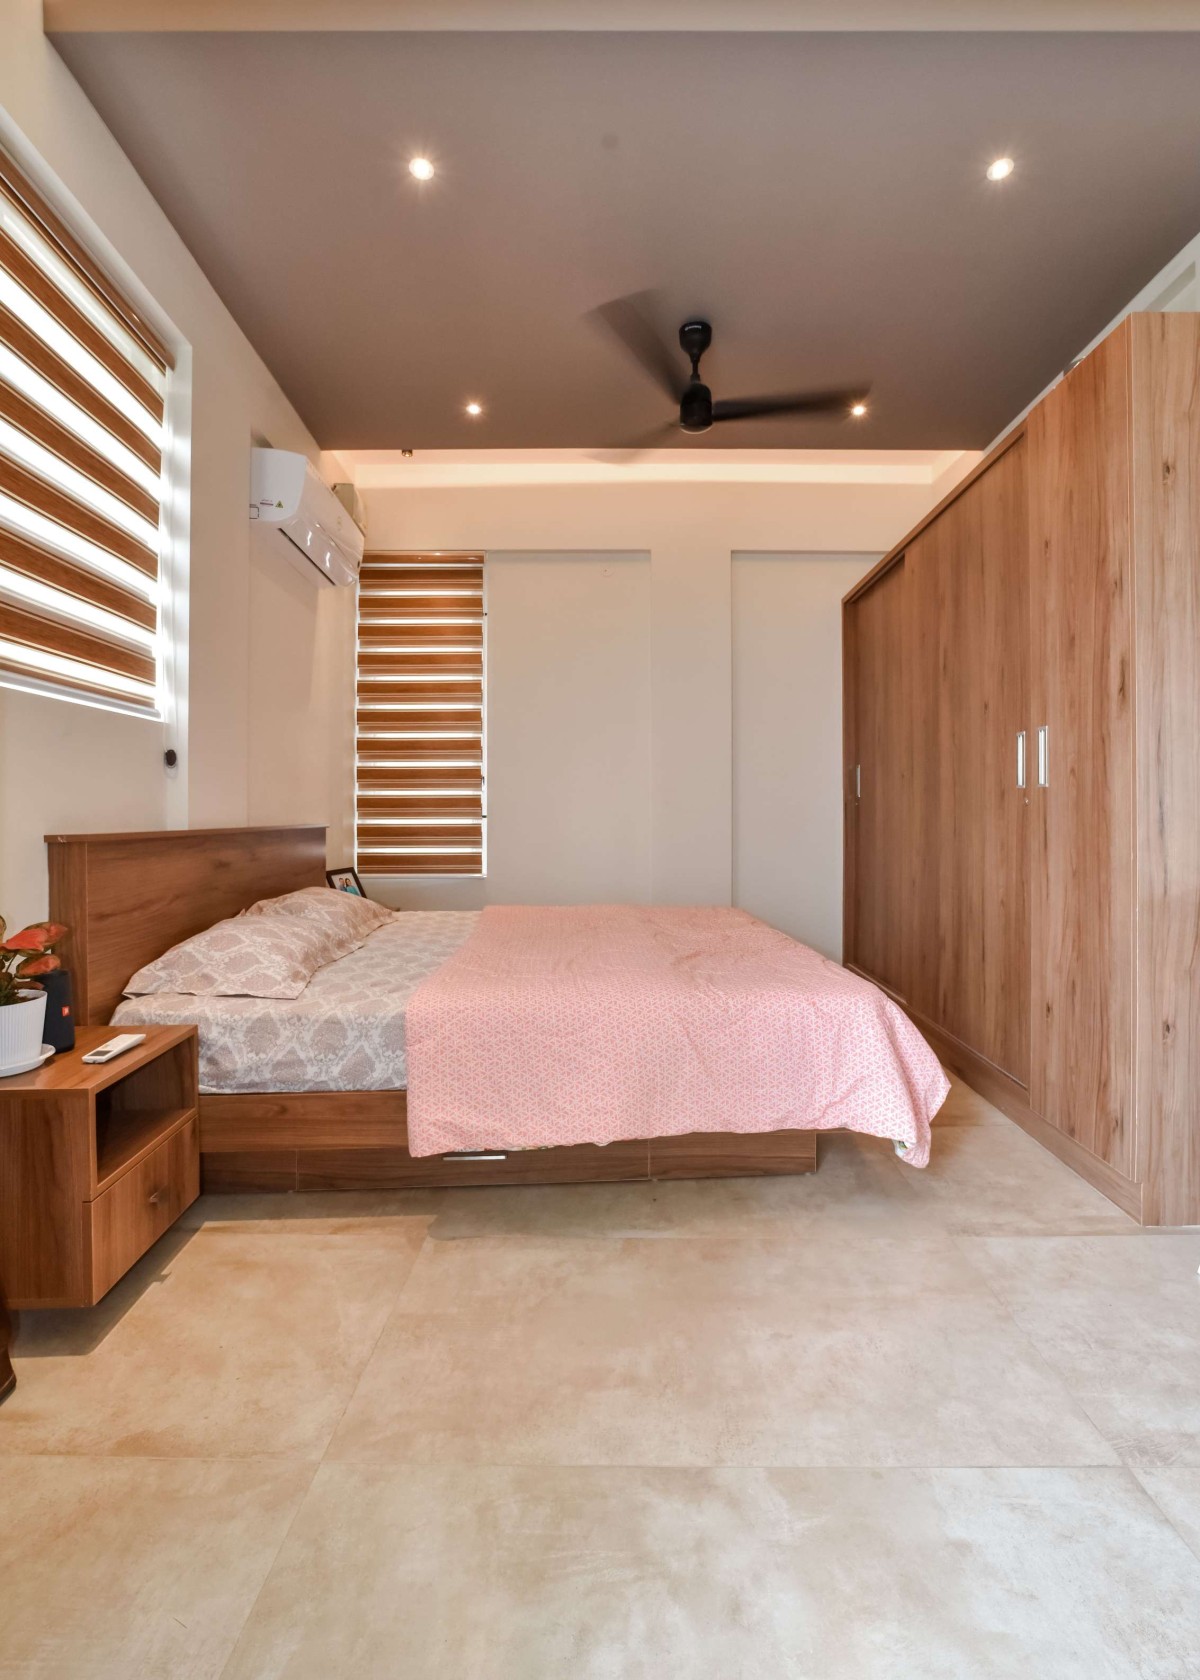 Bedroom 2 of The N’Arrow House by Designloom Architects